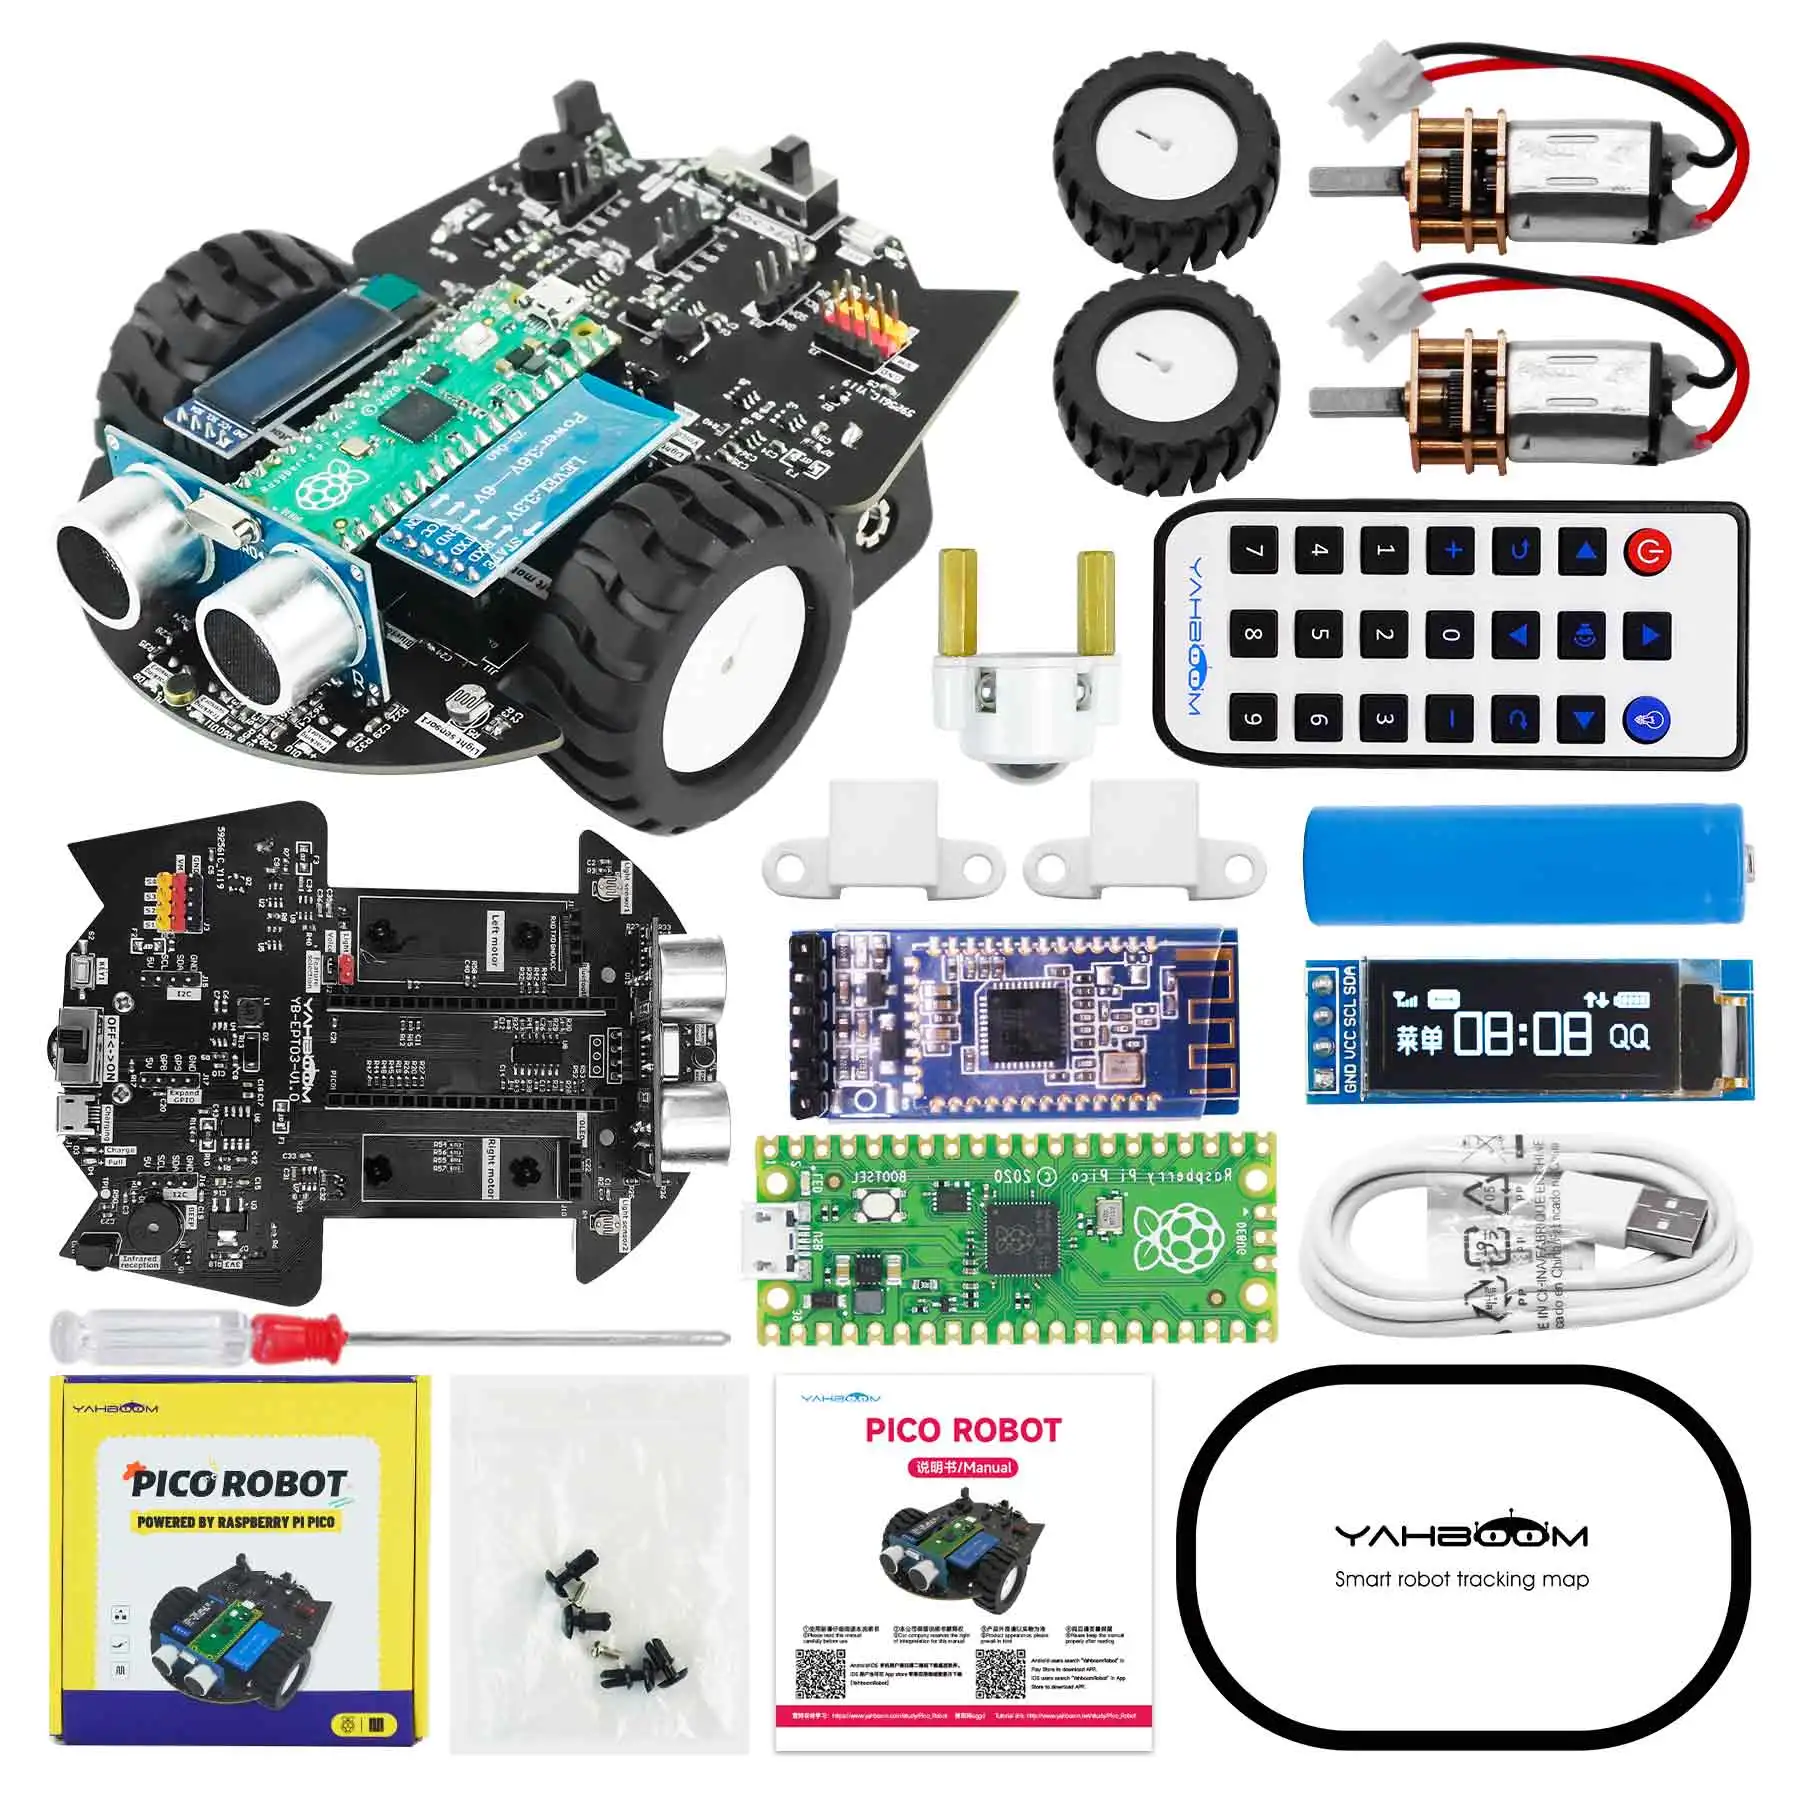 Yahboom Raspberry Pi Pico Robot Car Kit Open Source MicroPython Programming Support APP Control Tracking Include Battery